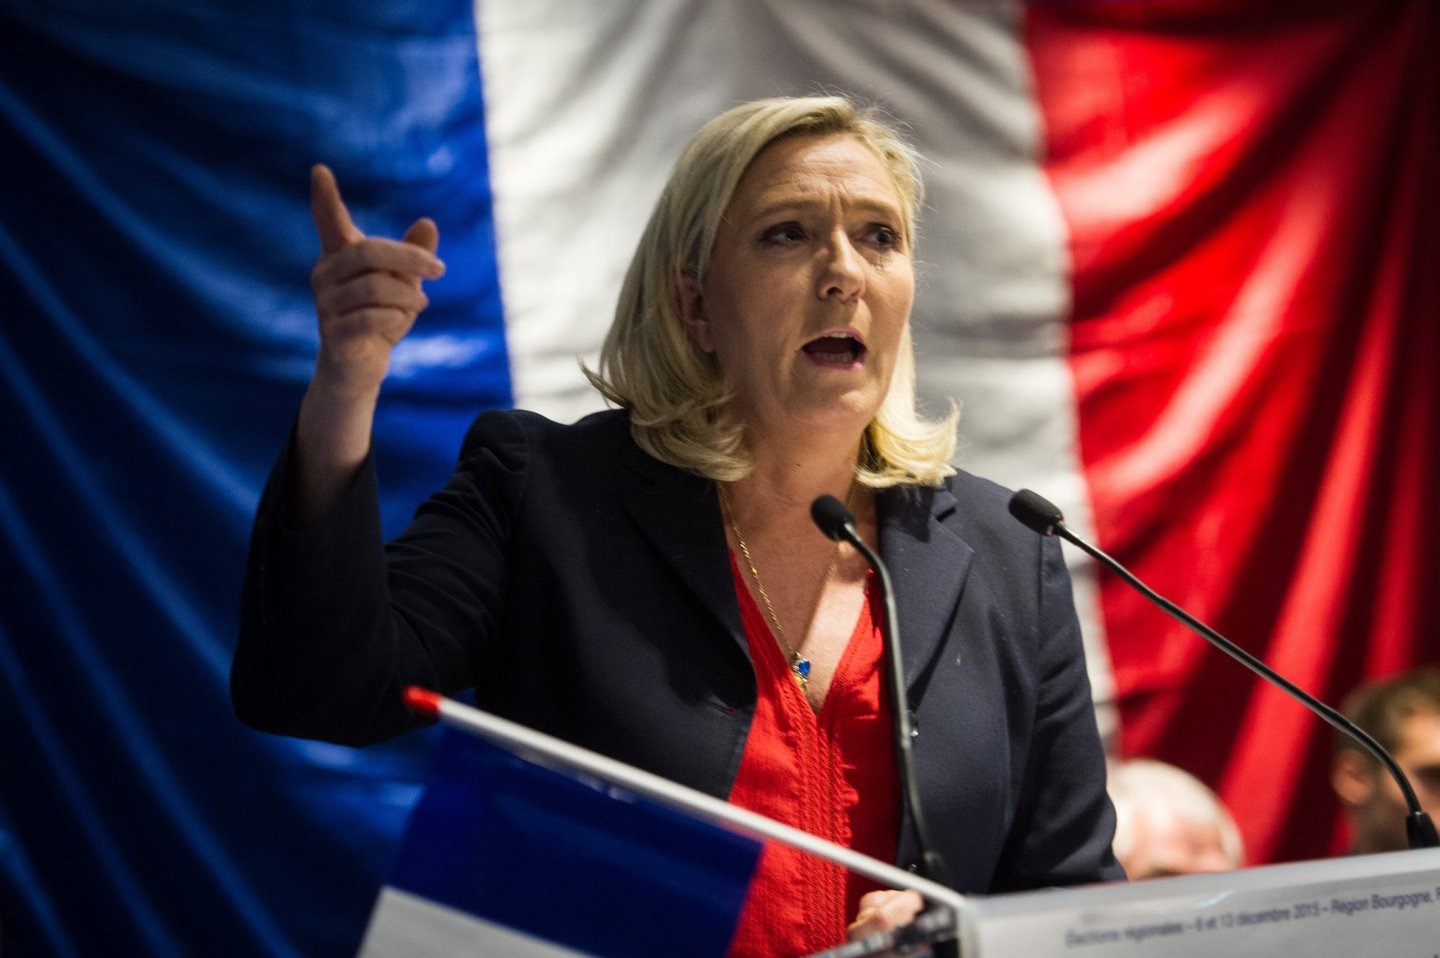 Head of the Front National (FN) far-right party, Marine Le Pen, delivers a speech during a meeting on October 28, 2015, in Besancon, as she supports FN top candidate for the upcoming regional elections for the Bourgogne Franche-Comte region, Sophie Montel ]. AFP PHOTO / SEBASTIEN BOZON (Photo credit should read SEBASTIEN BOZON/AFP/Getty Images)